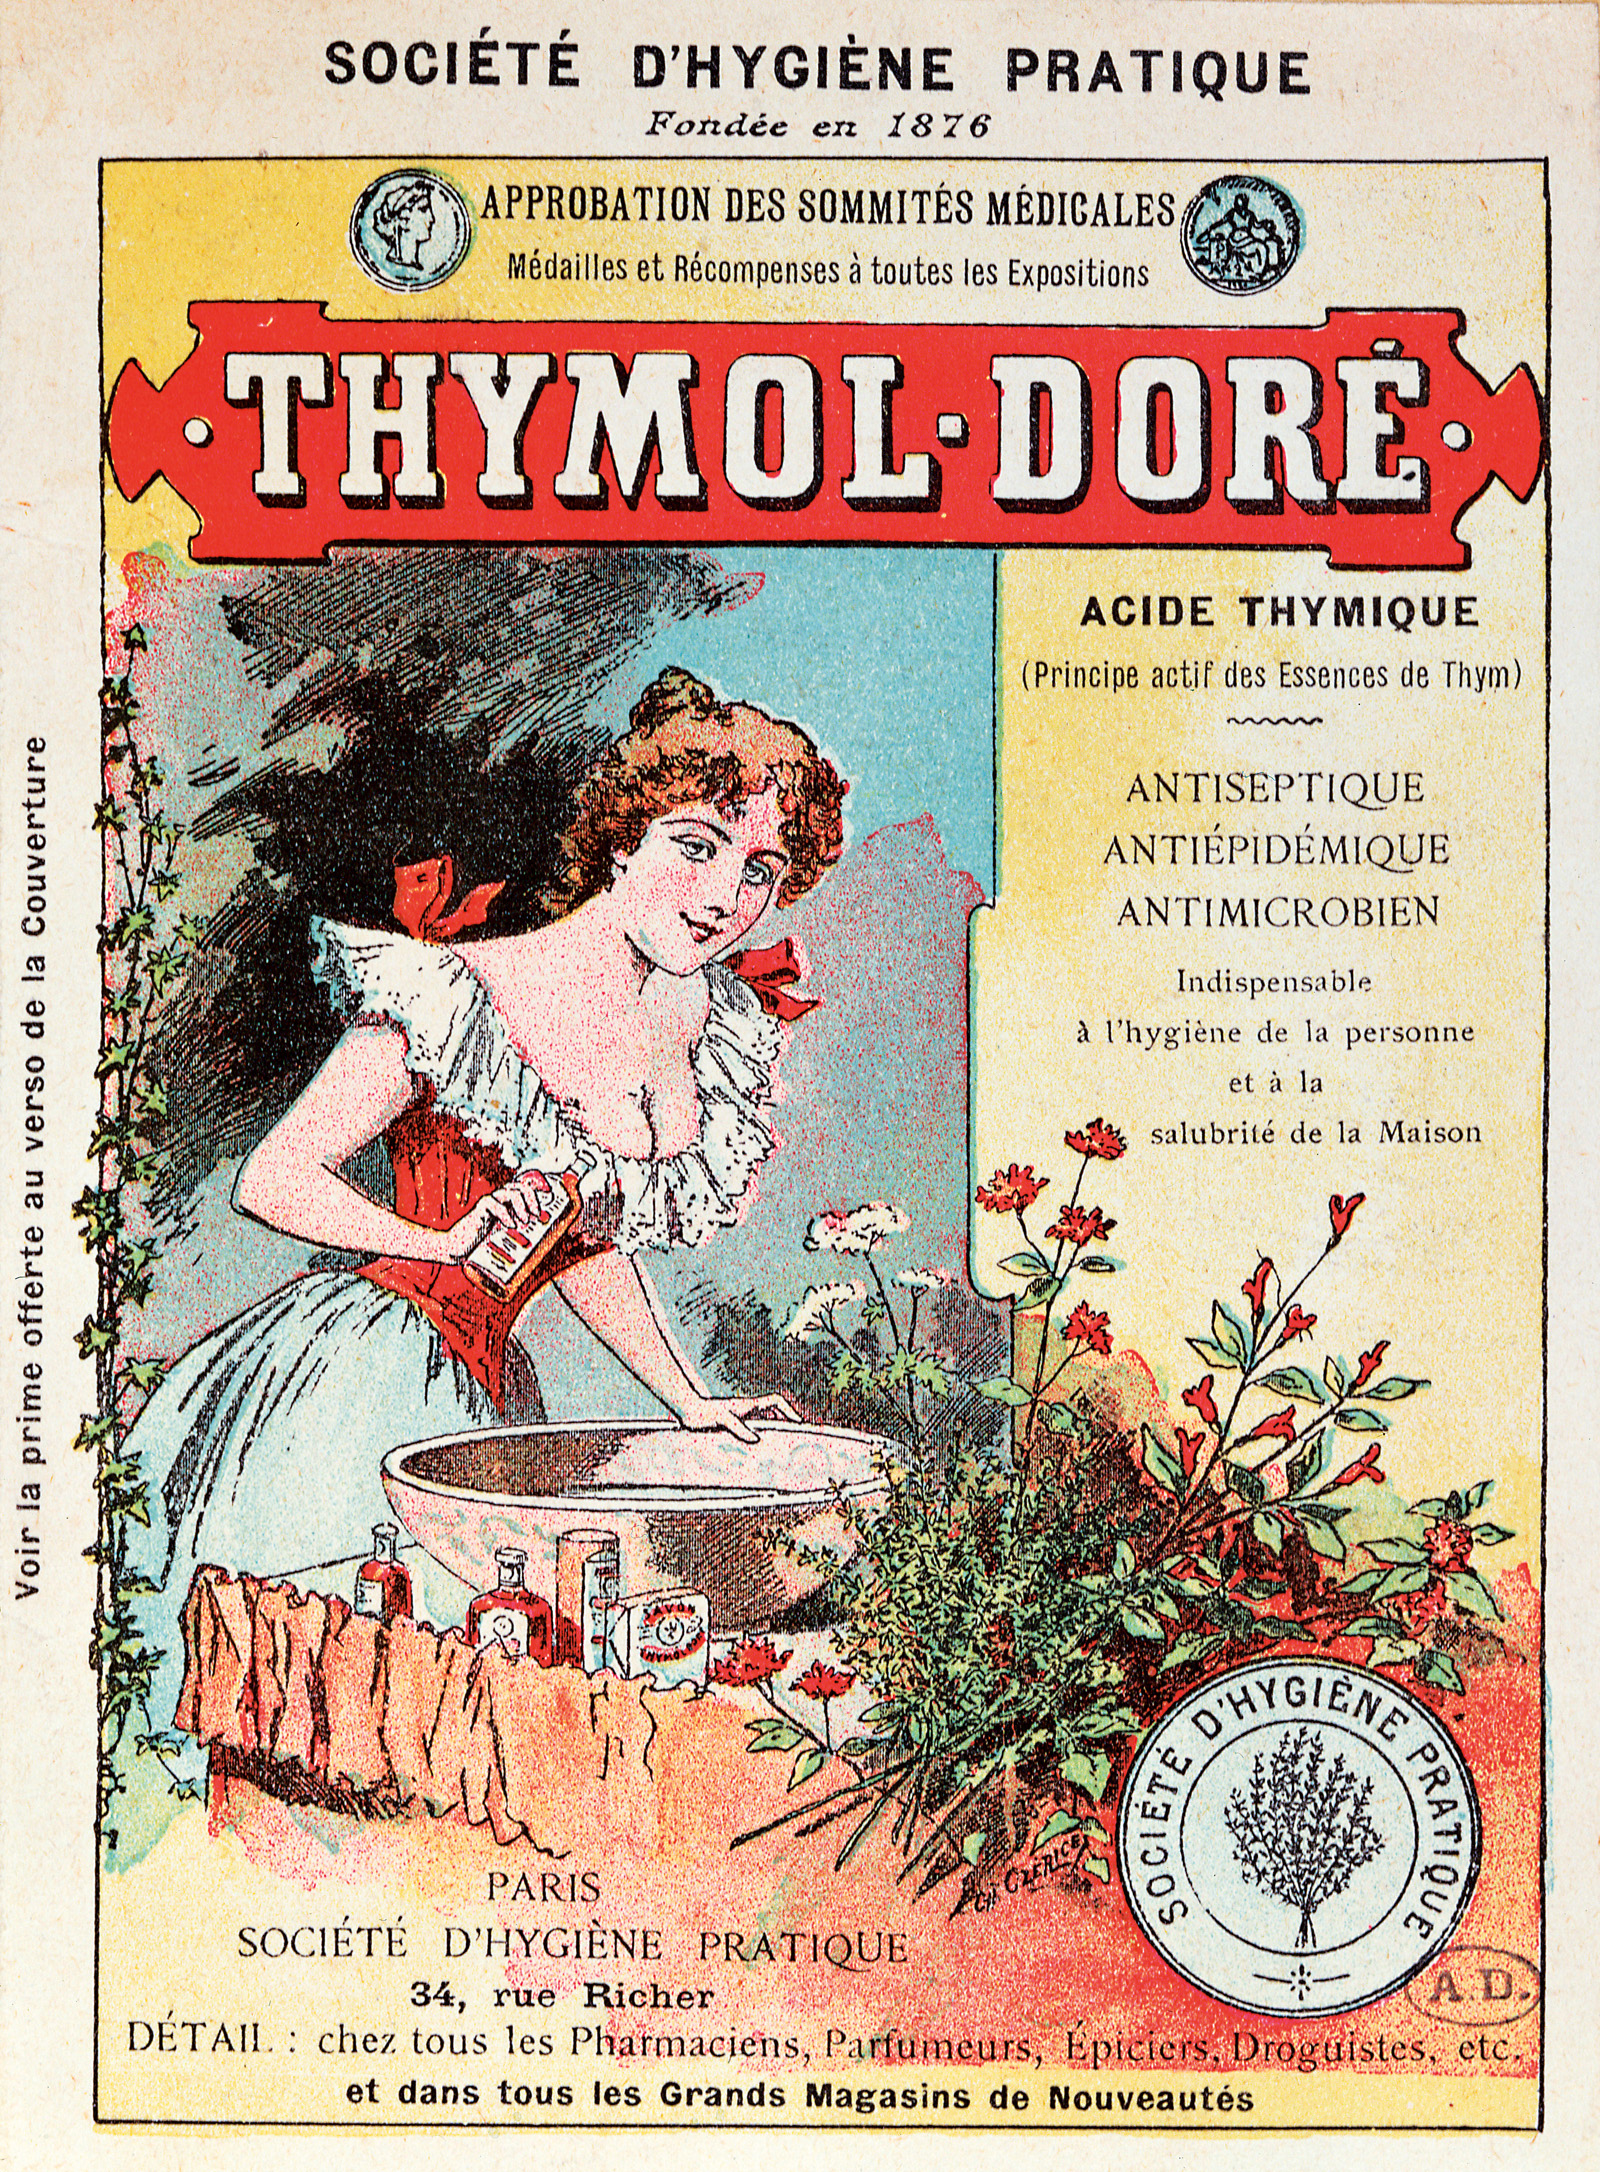 This French advertisement marketed thyme-based essential oil for health in 1908.